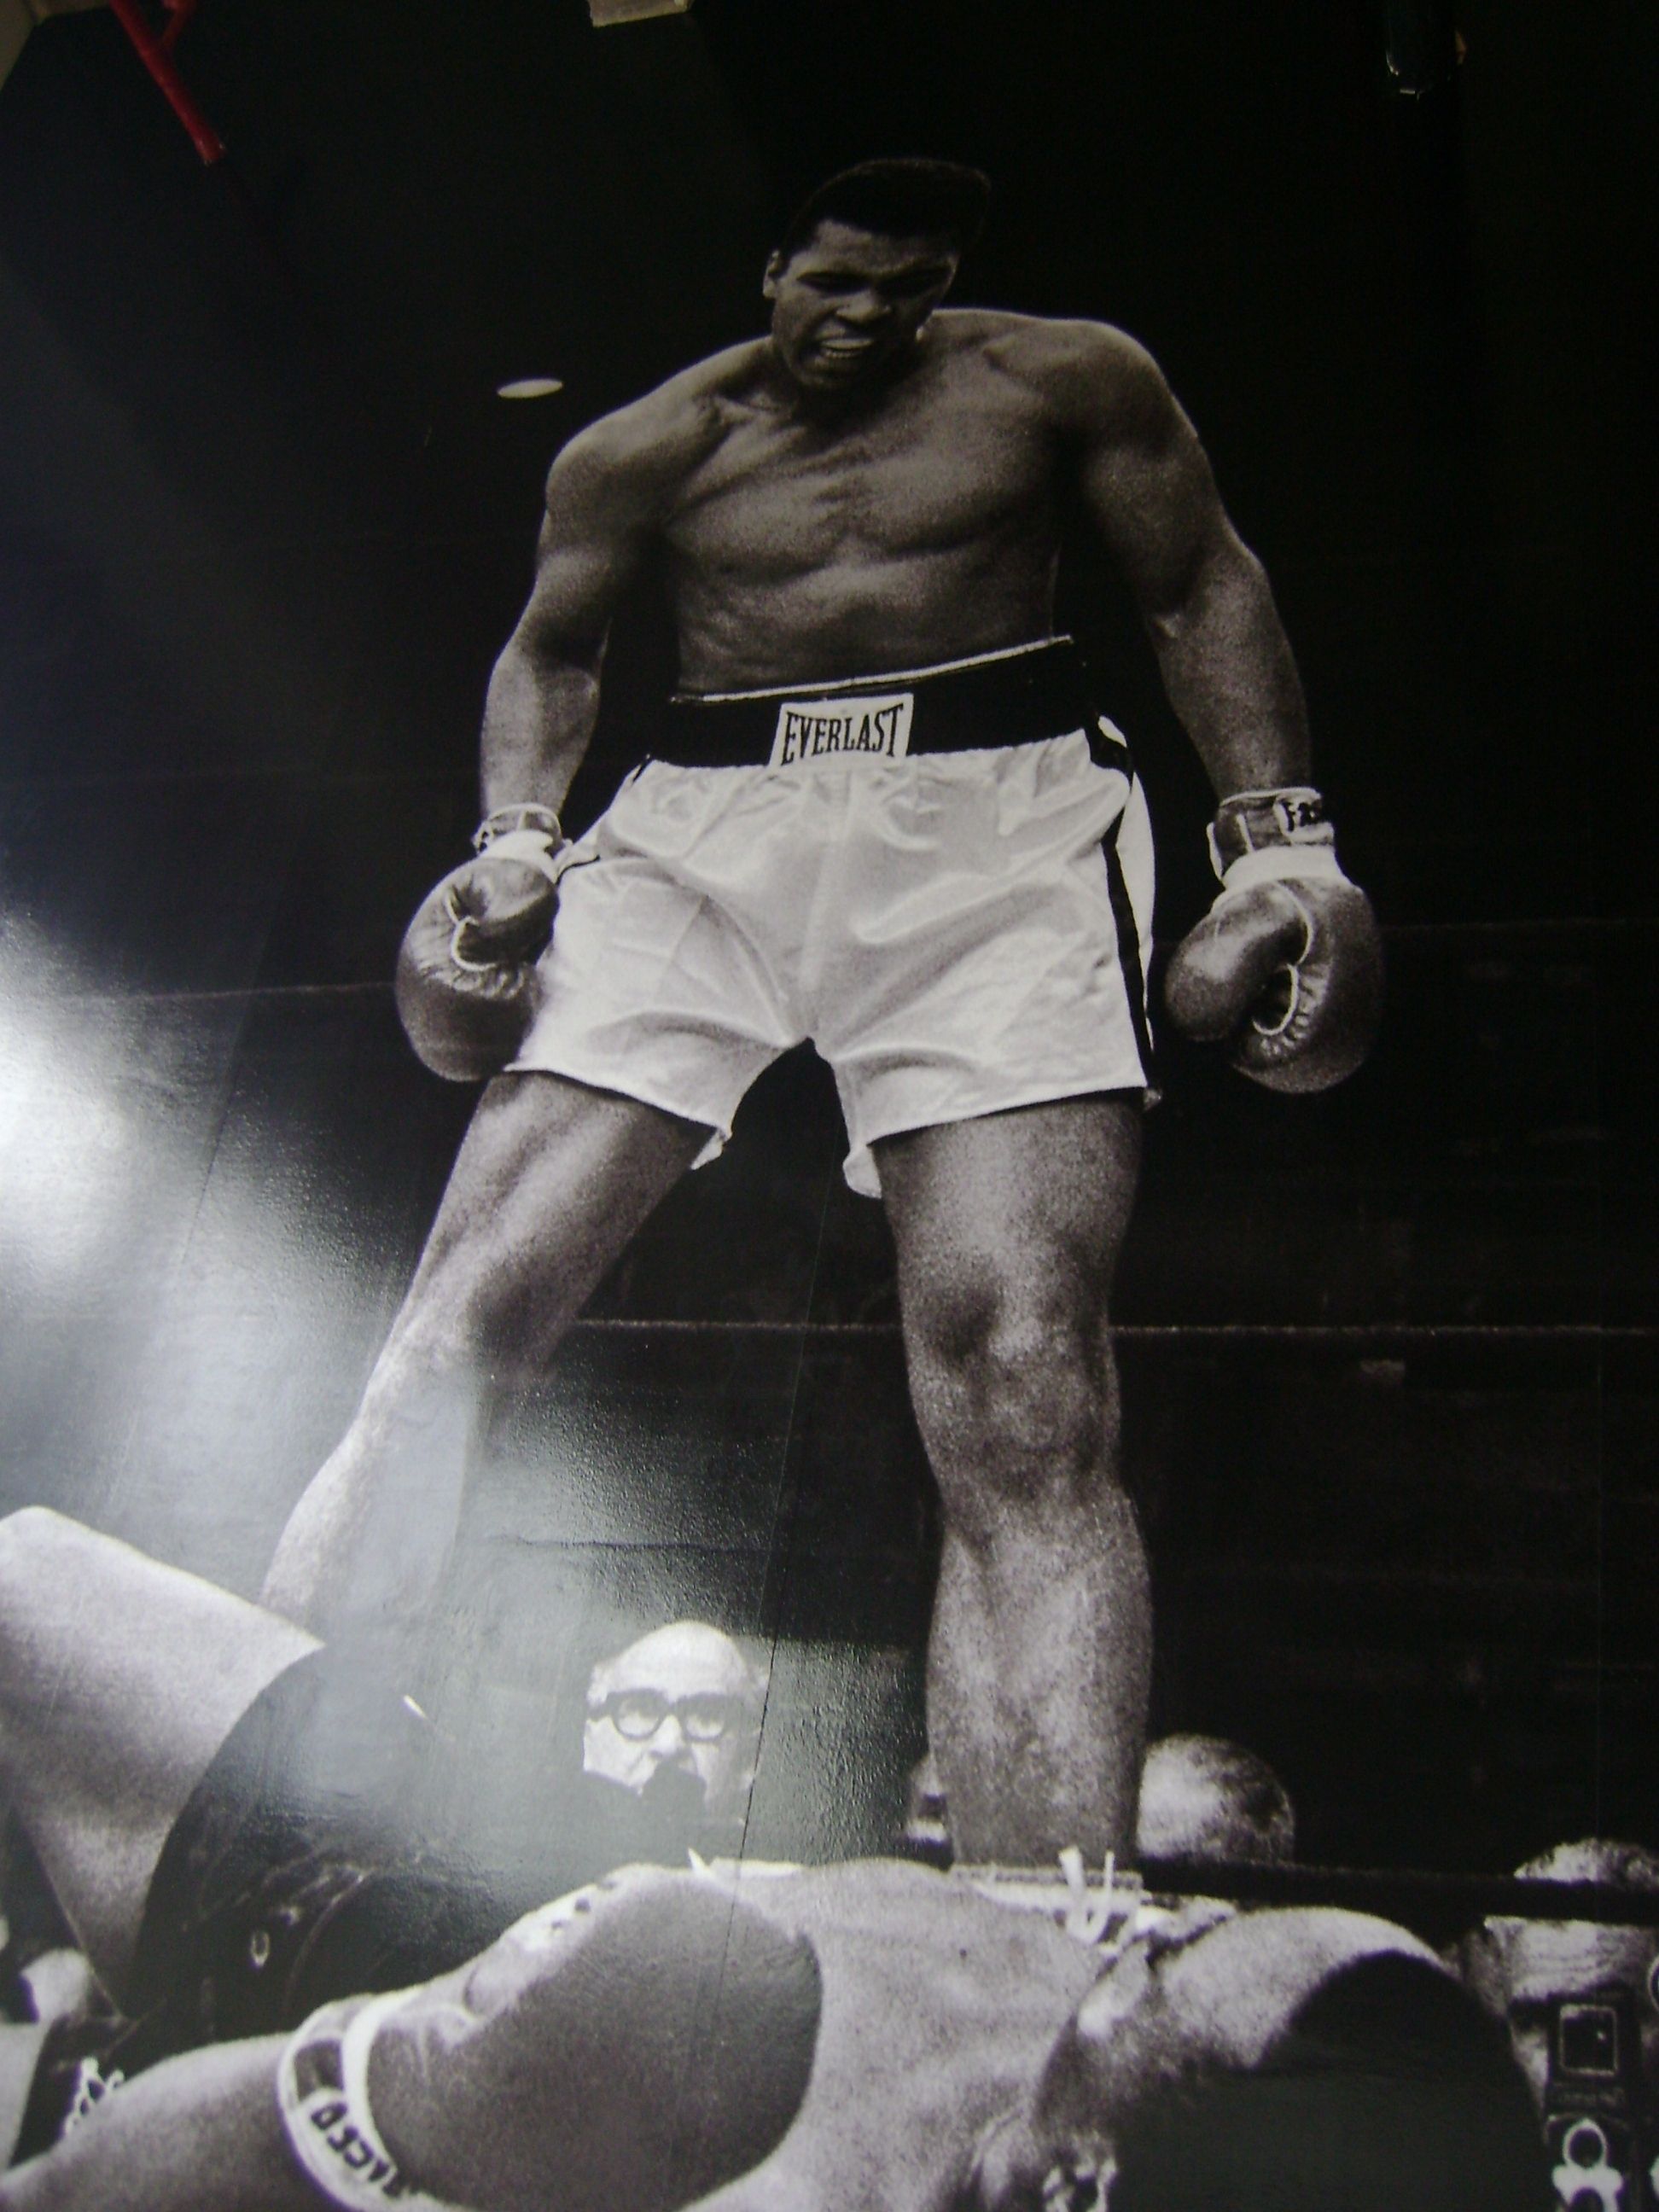 Photo taken by Alice Chong of a Muhammad Ali poster